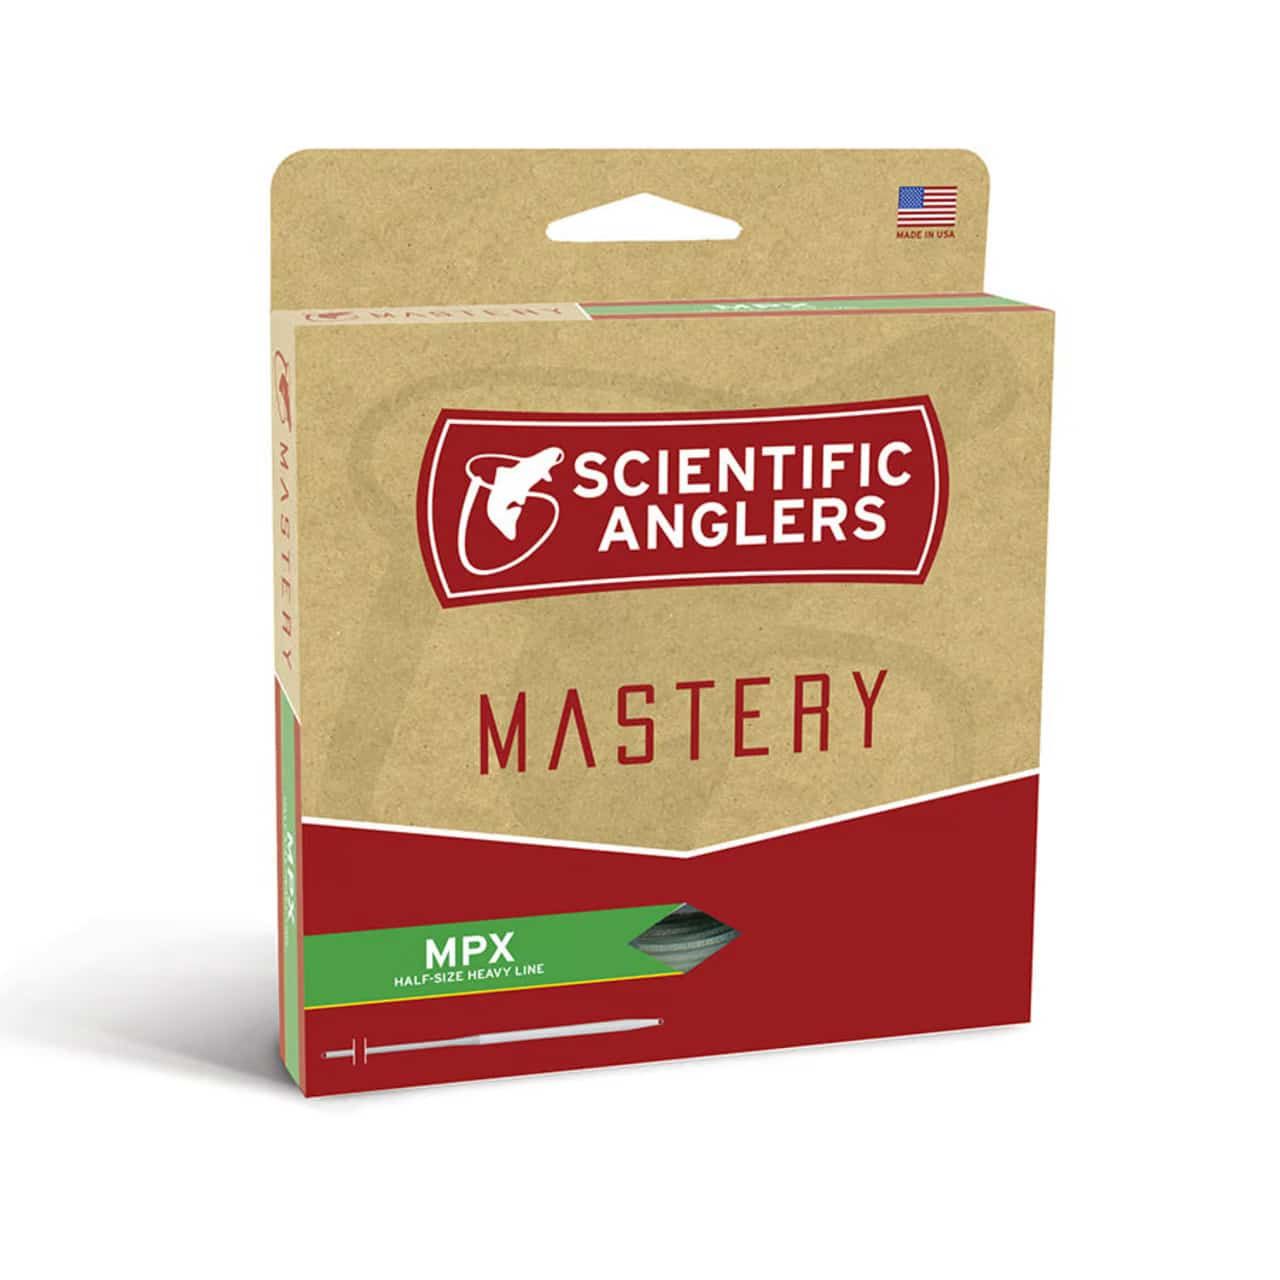 Scientific Anglers Mastery MPX Fly Line - Fin & Game